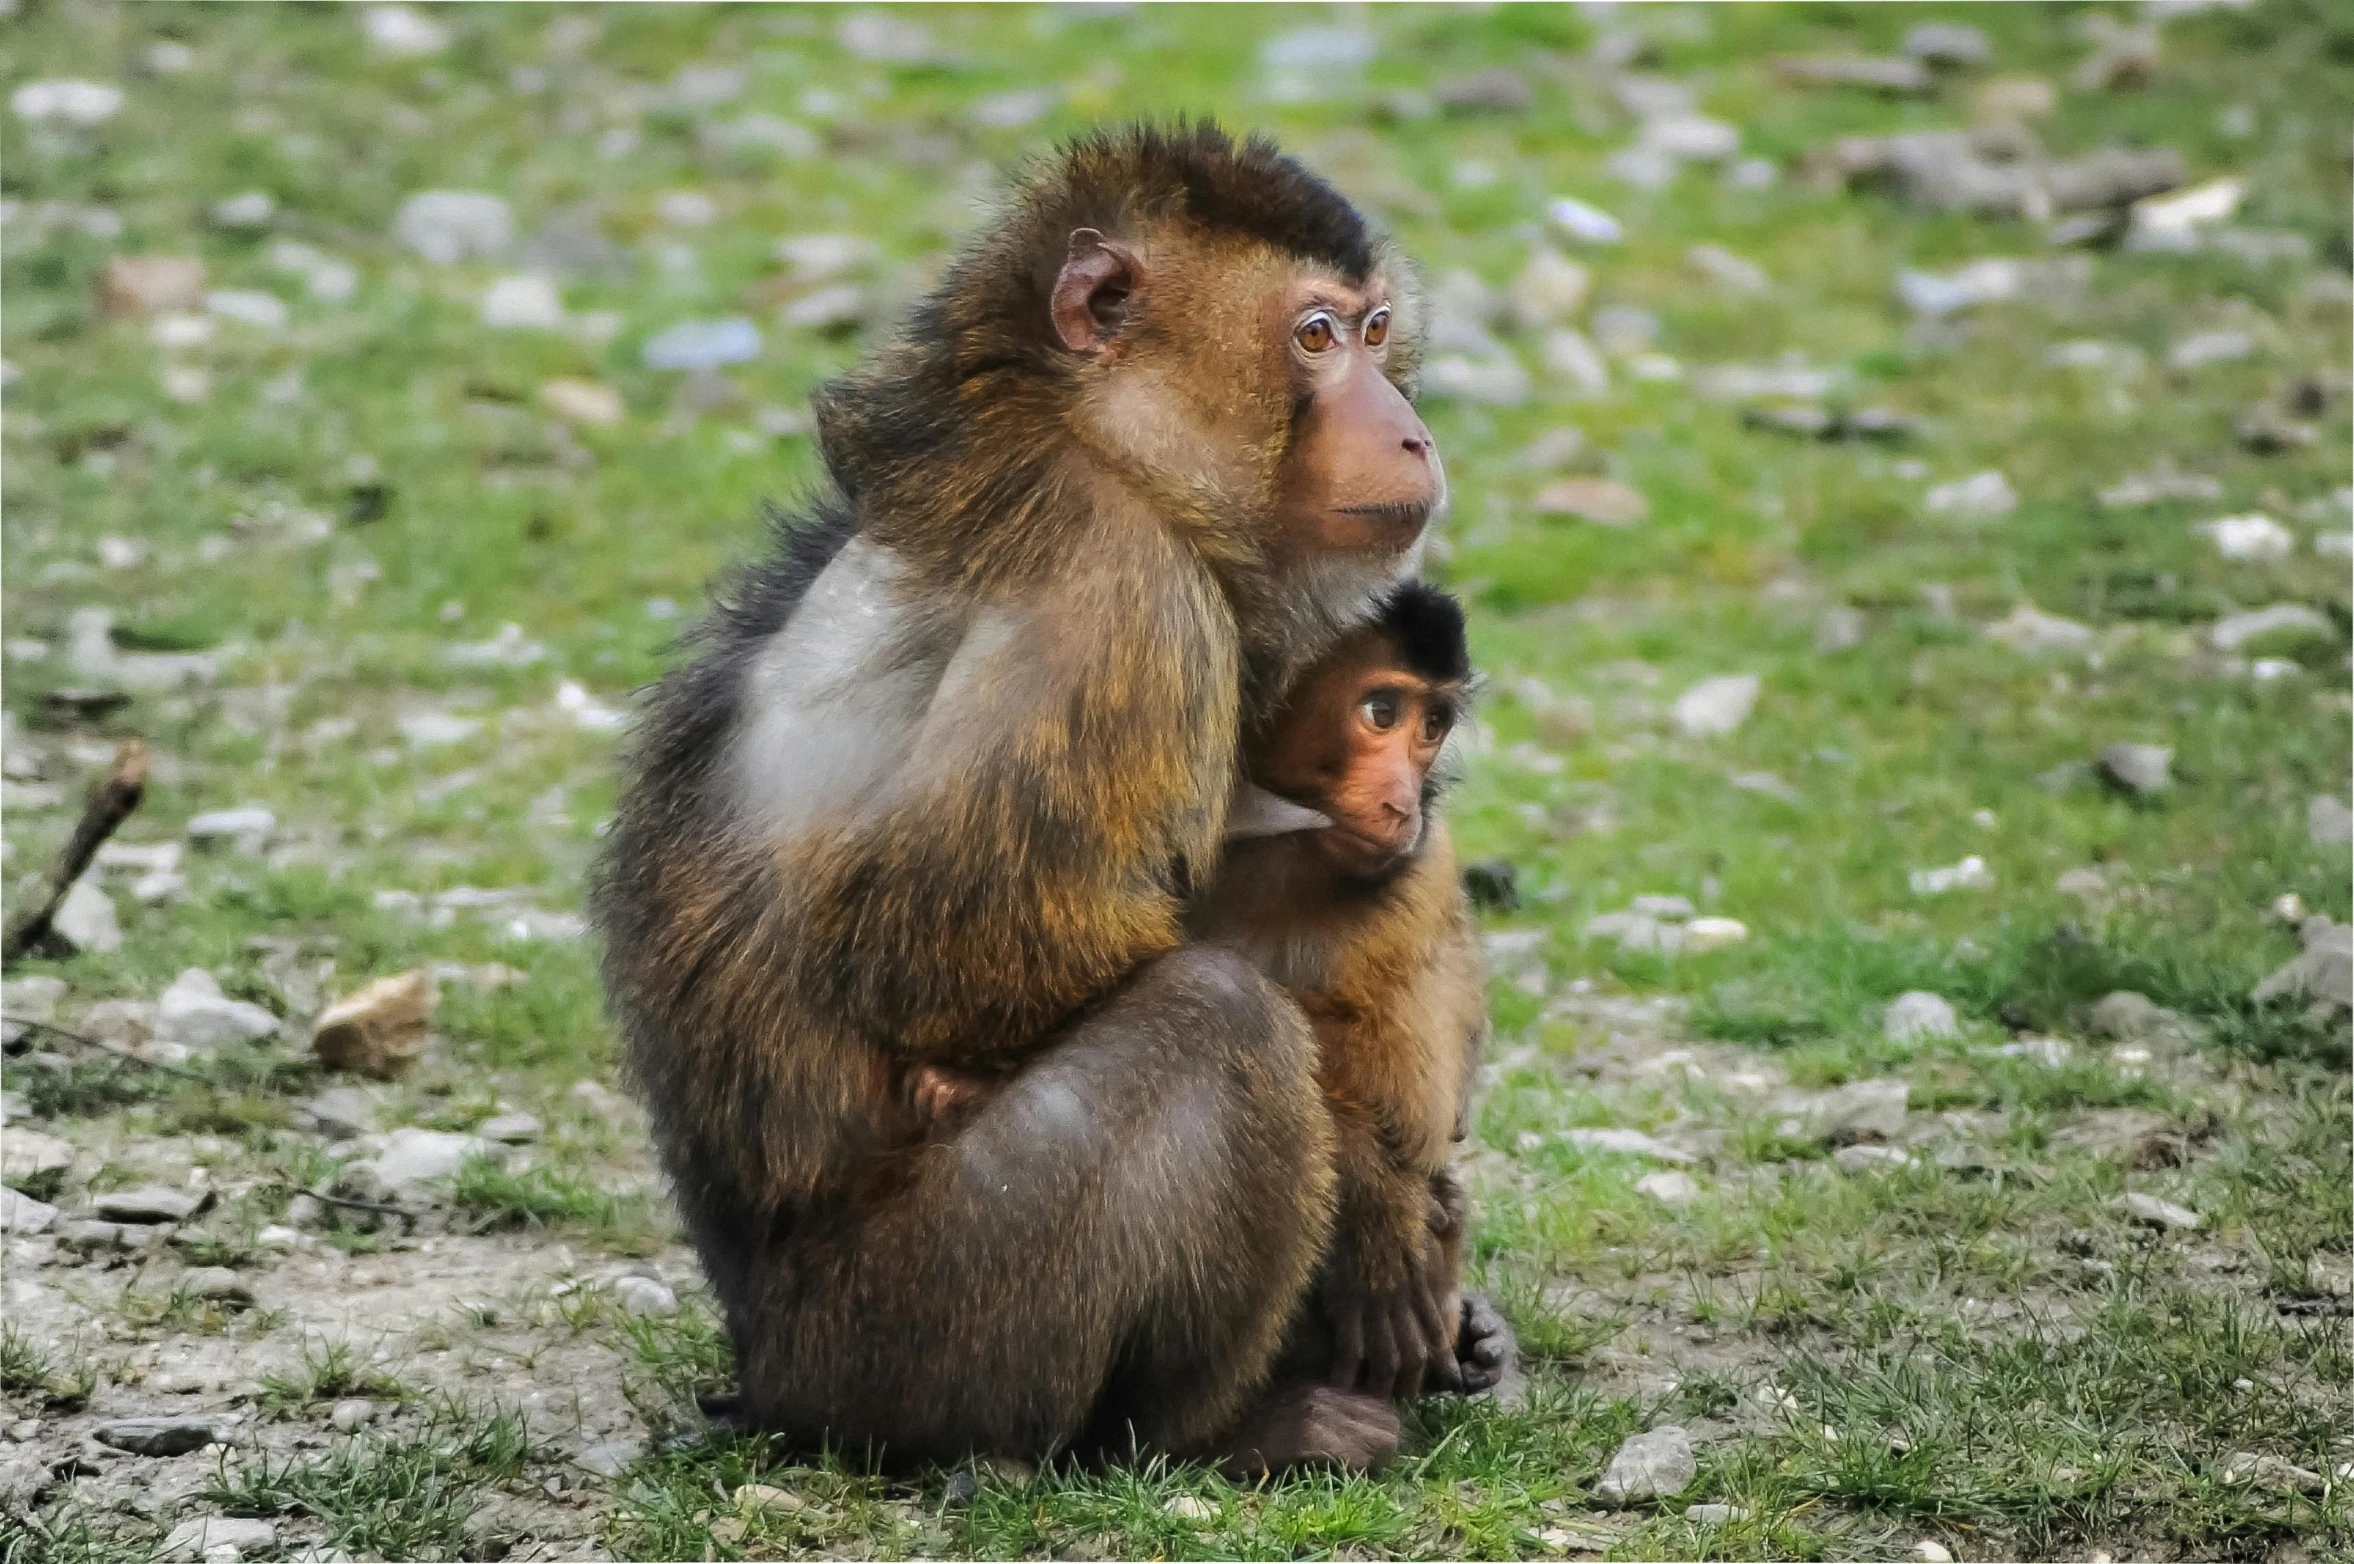 a long - hair monkey sits with a baby sitting on the ground